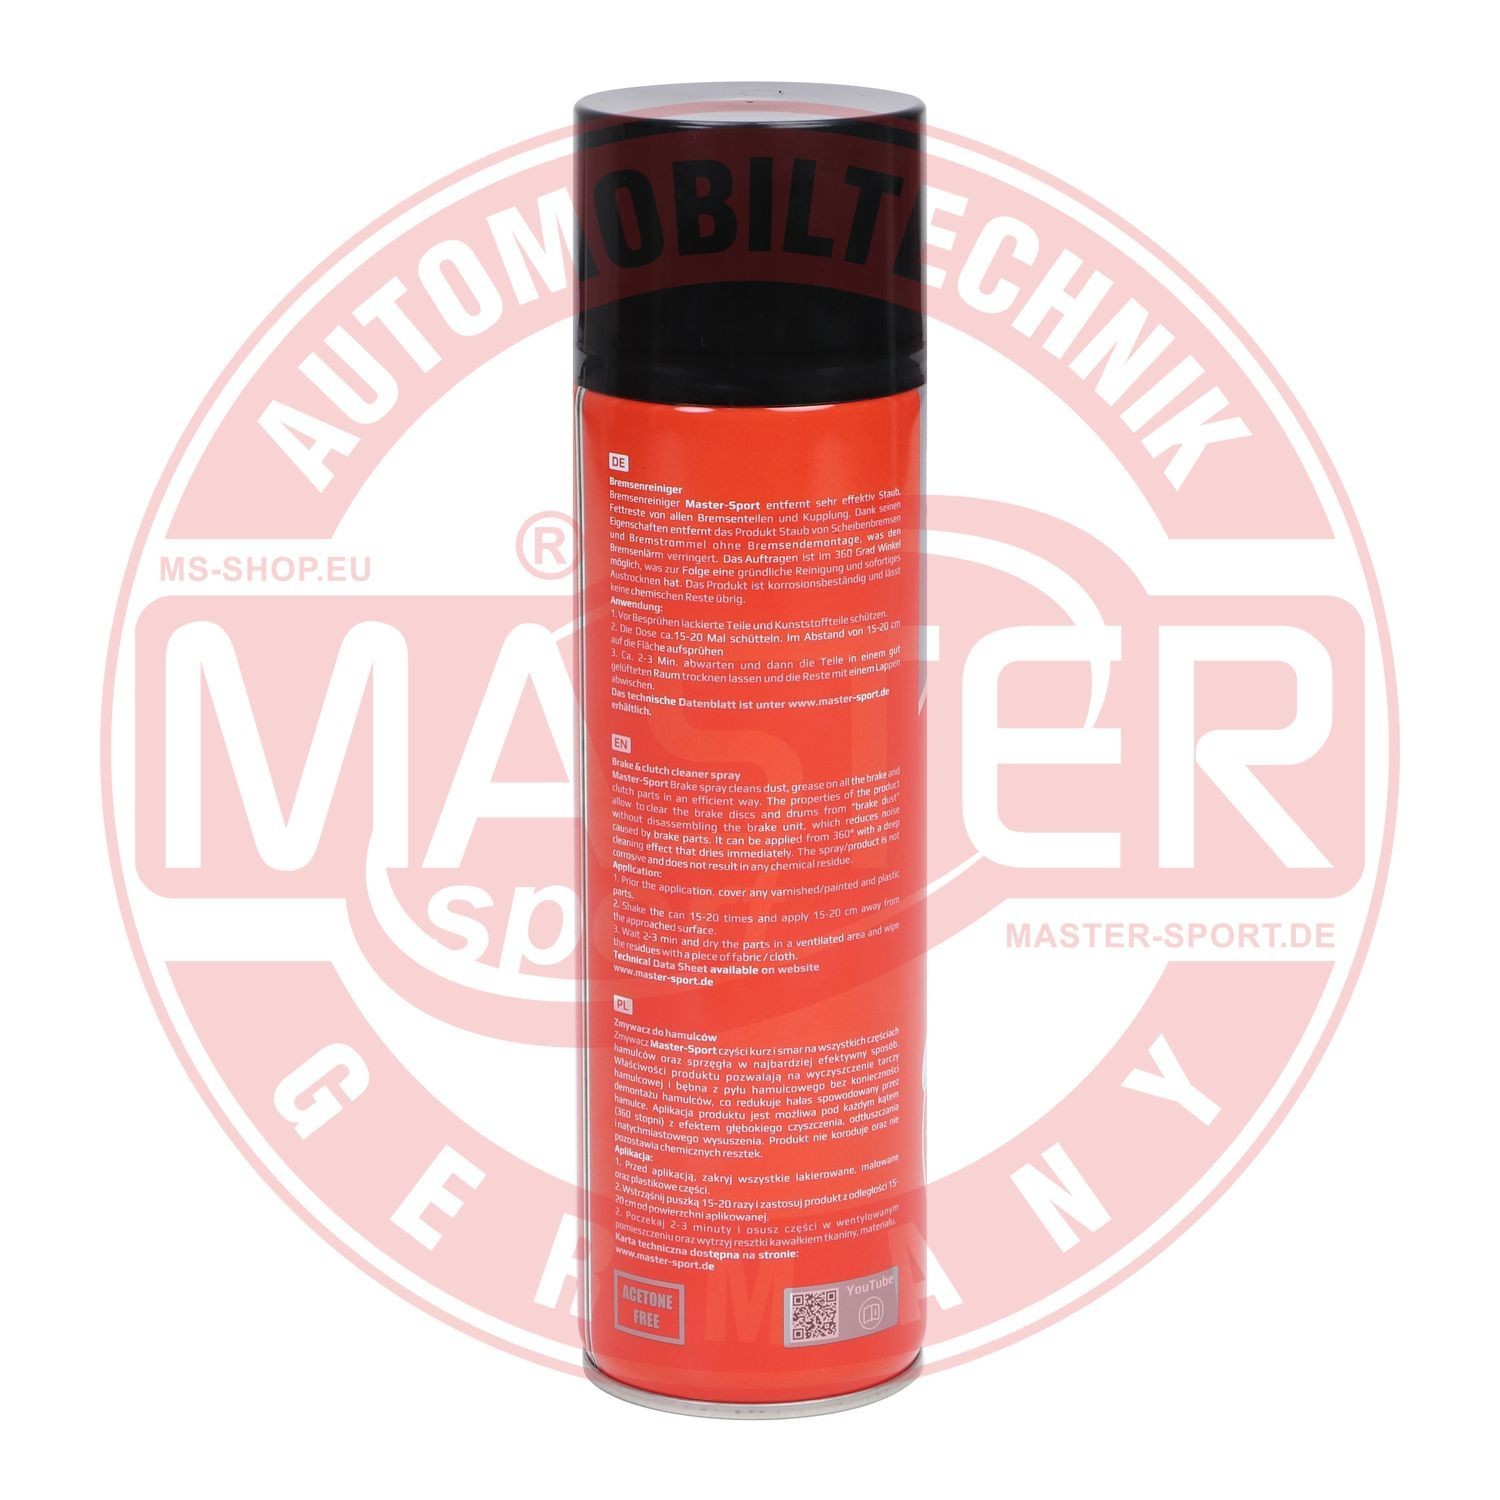 912001500 Brake cleaner fluid MASTER-SPORT AB912001000 review and test